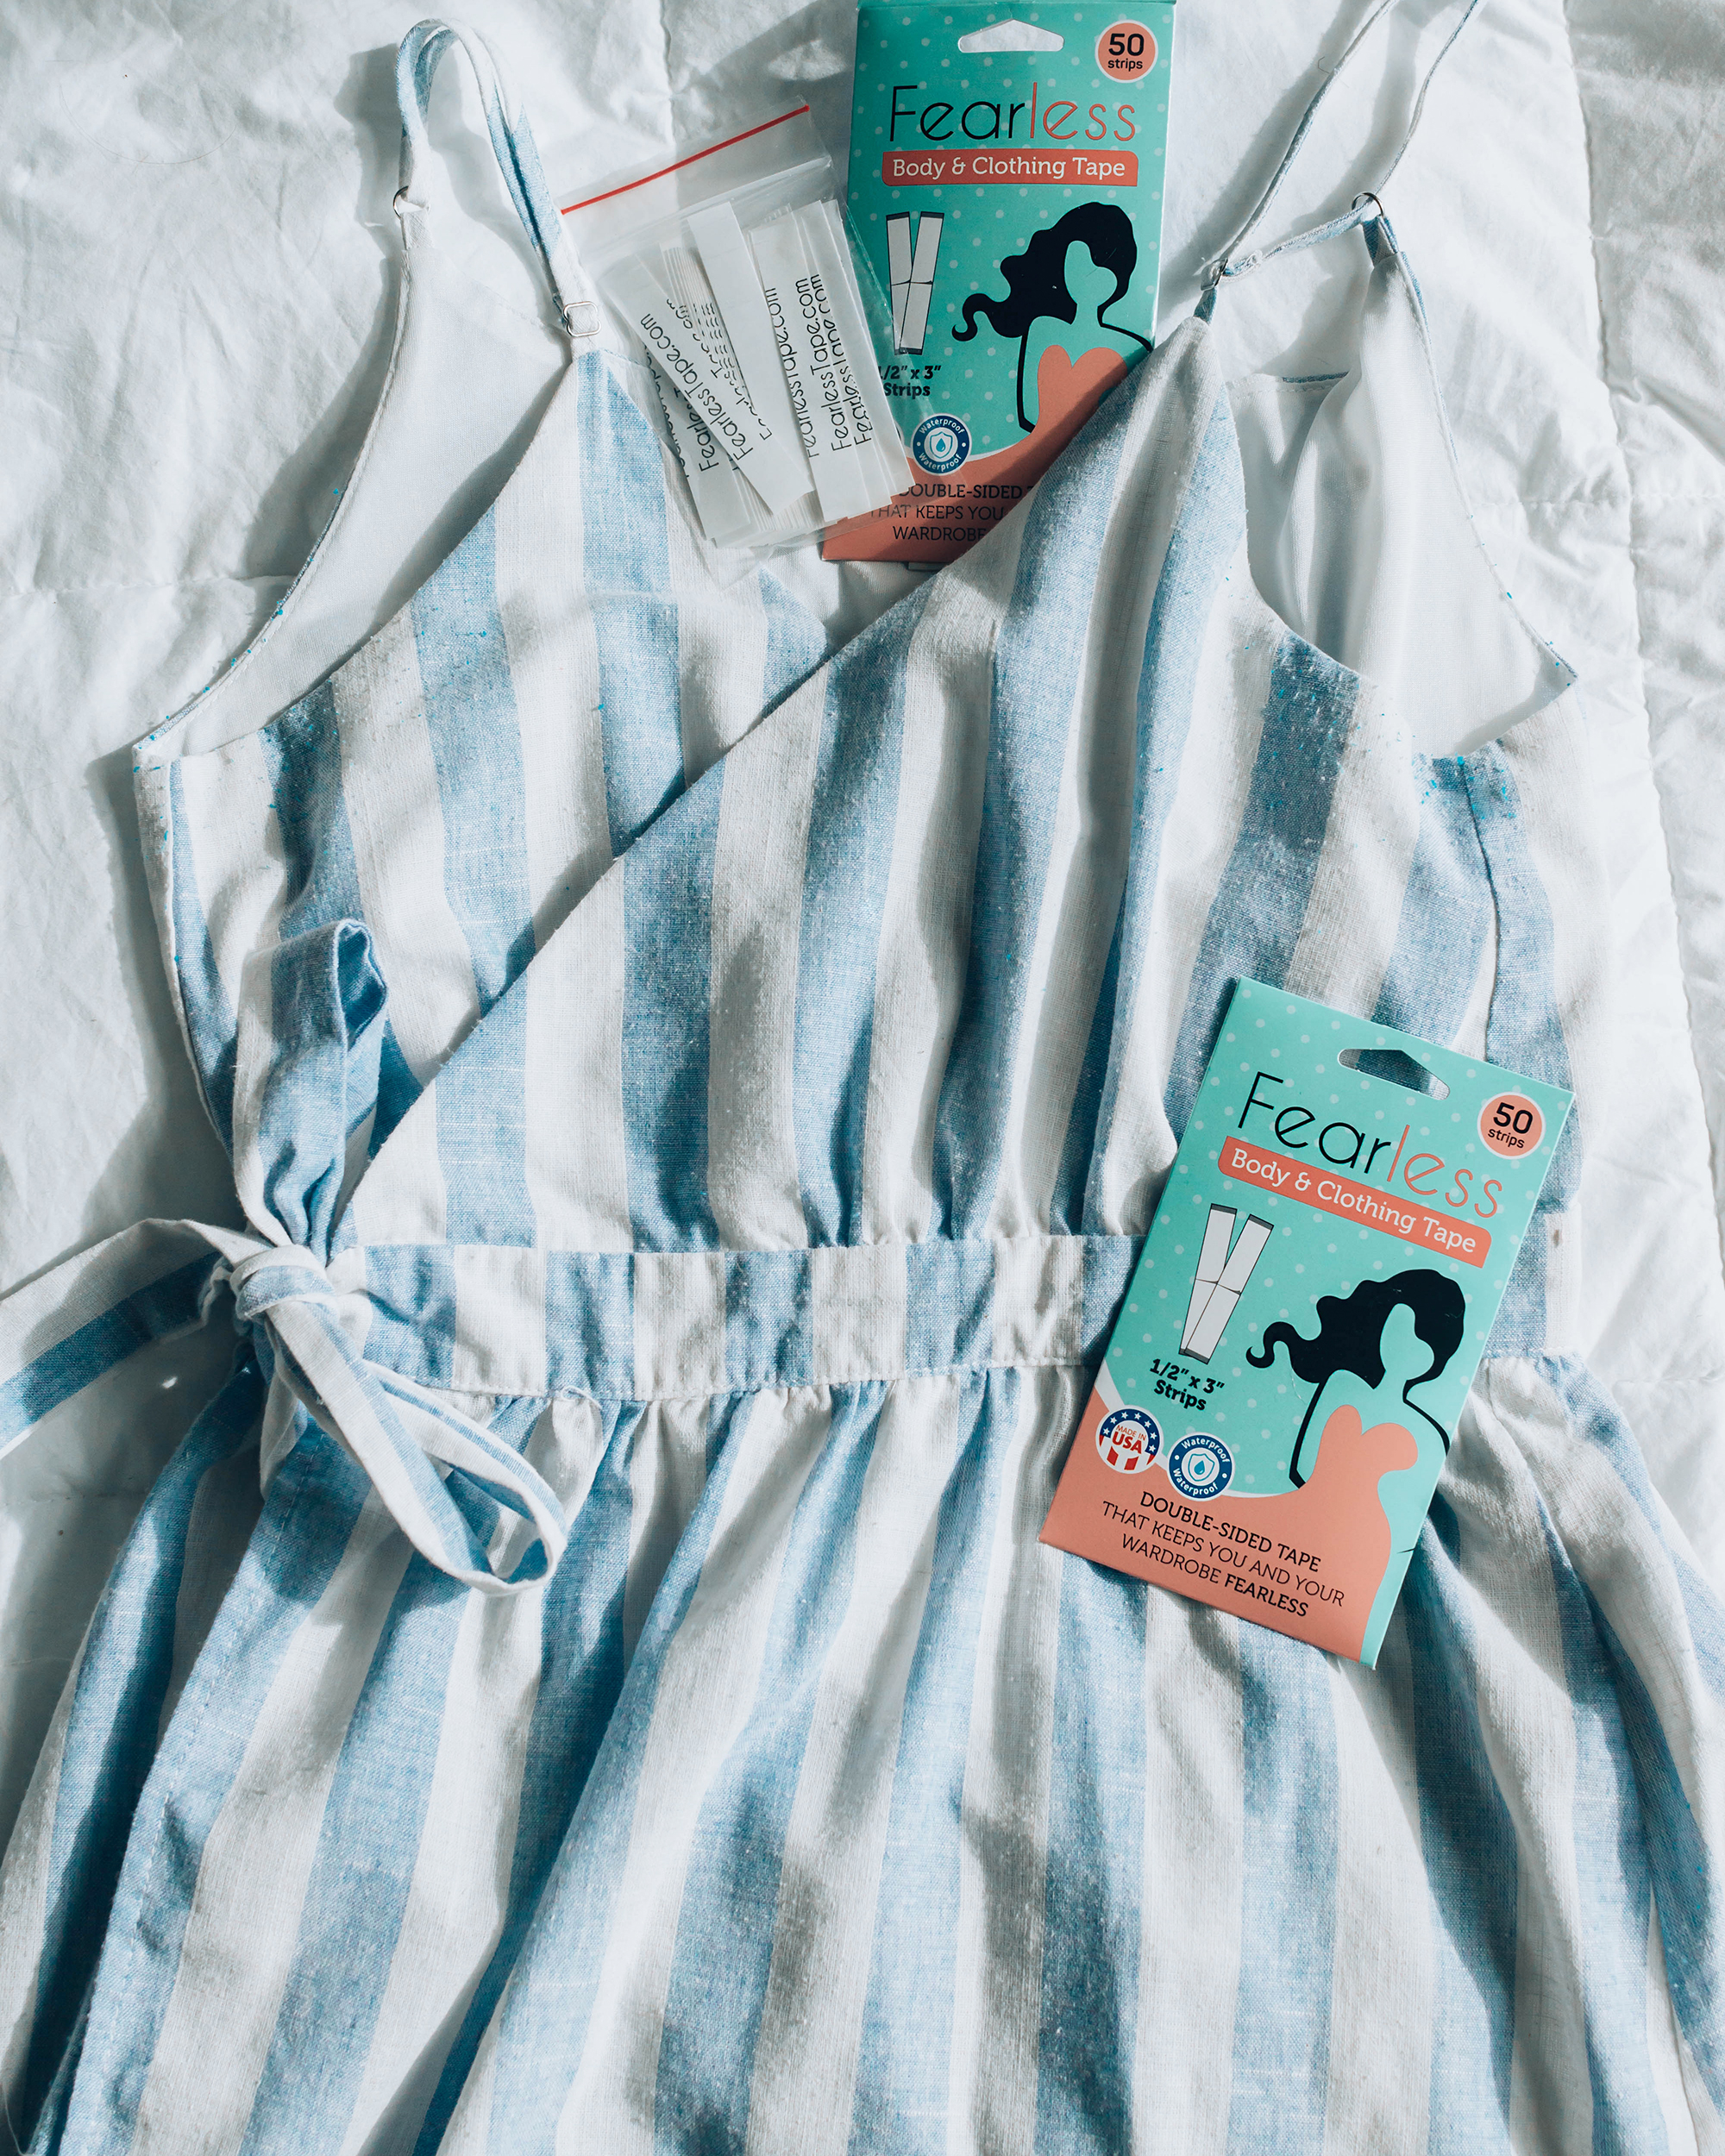 Fearless Tape package flatlay with striped dress